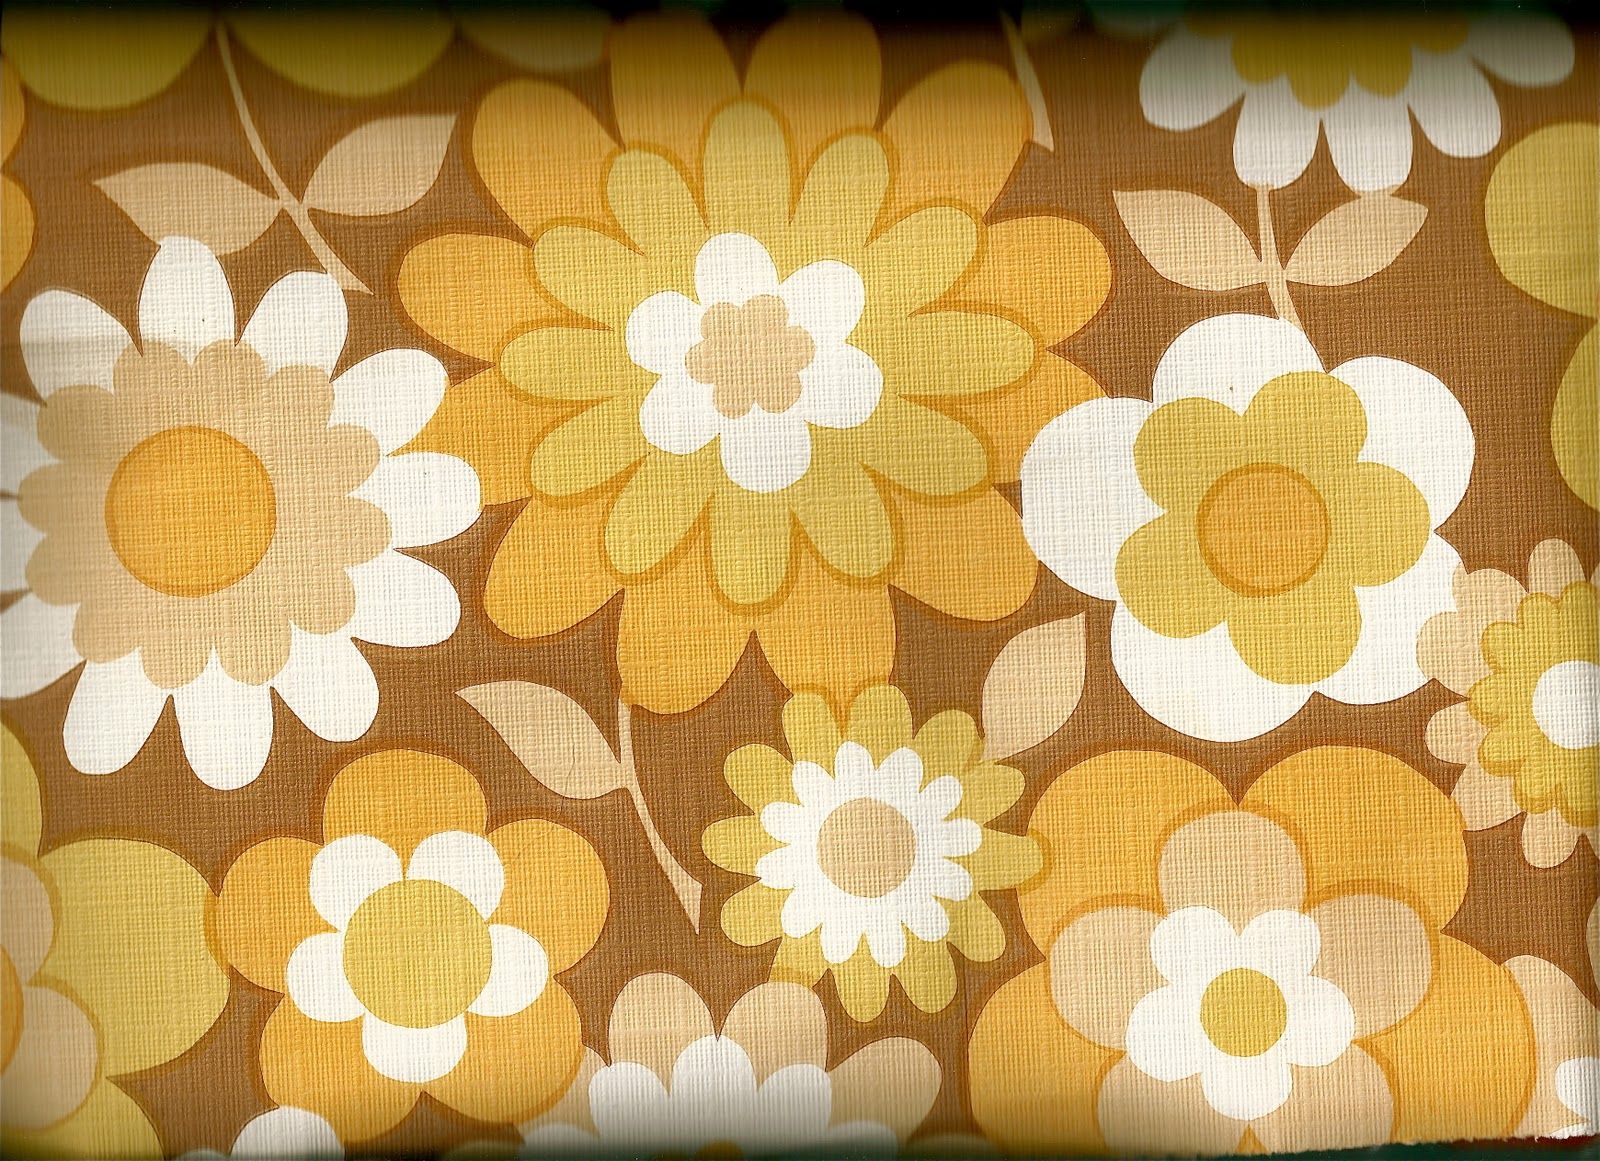 A close up of a fabric with yellow and white flowers on it - 70s